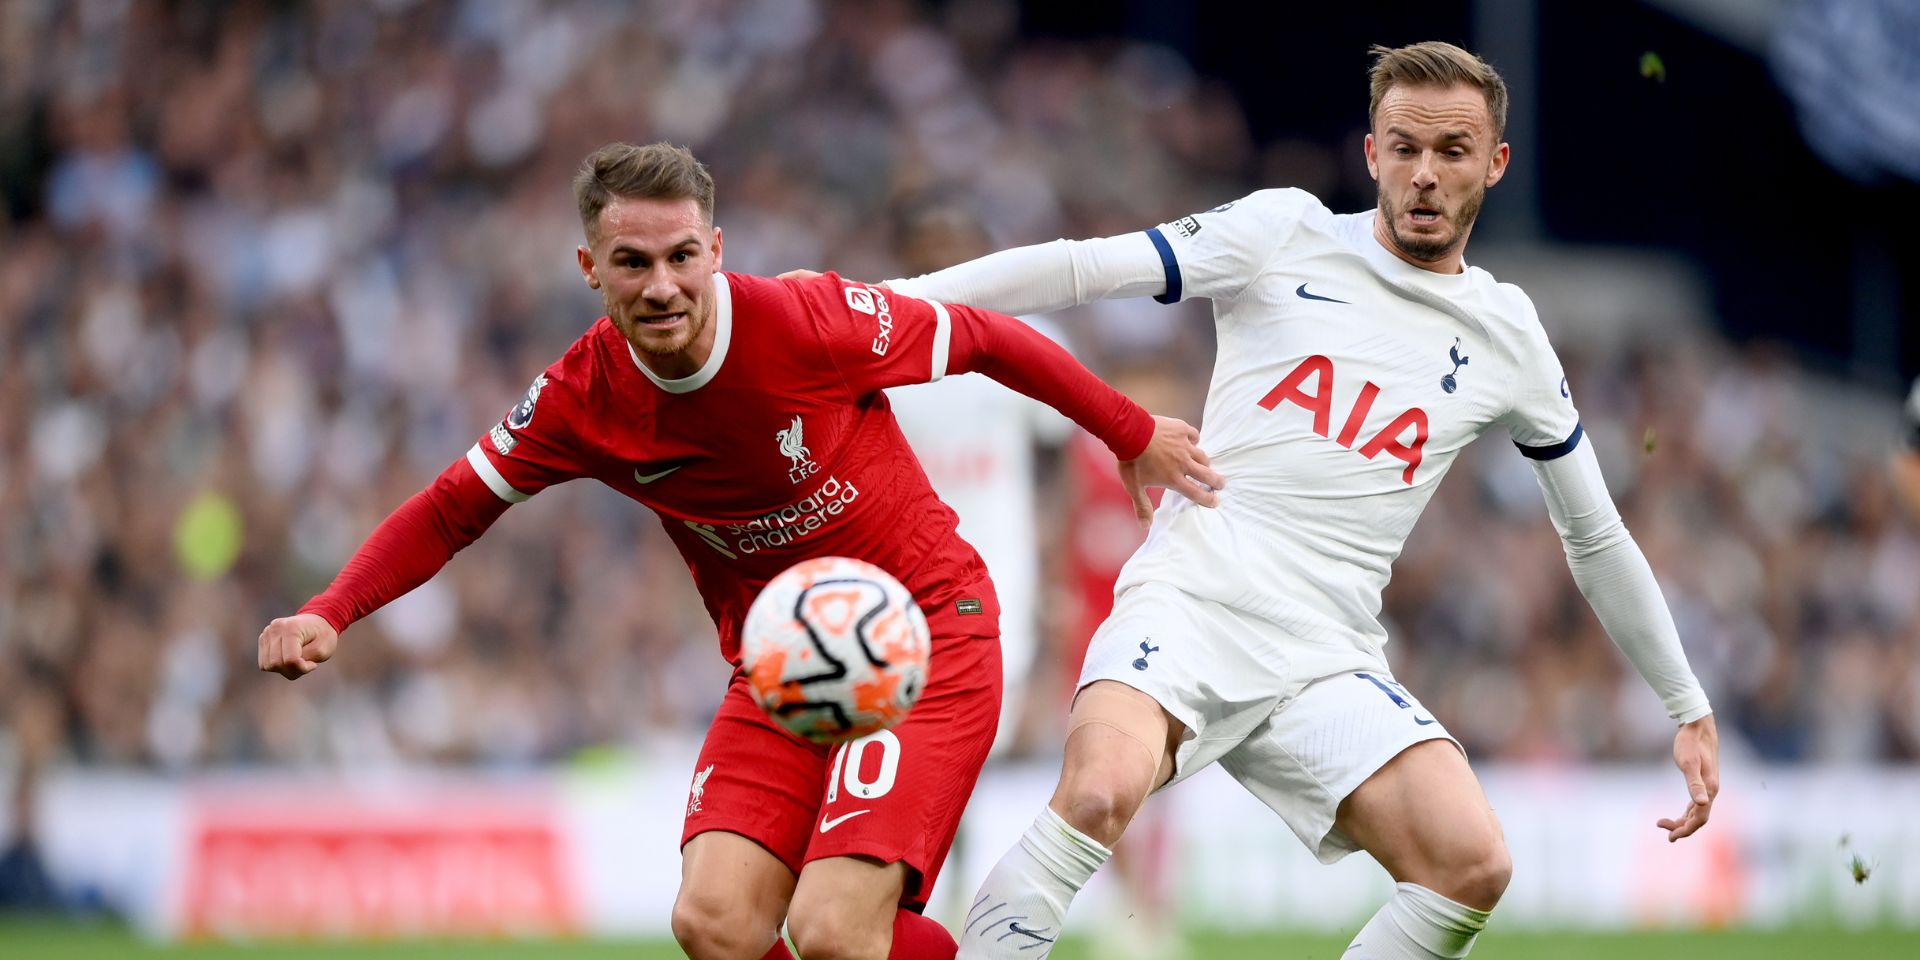 Mac Allisters 12 players comment to Spurs player shows Liverpool fury